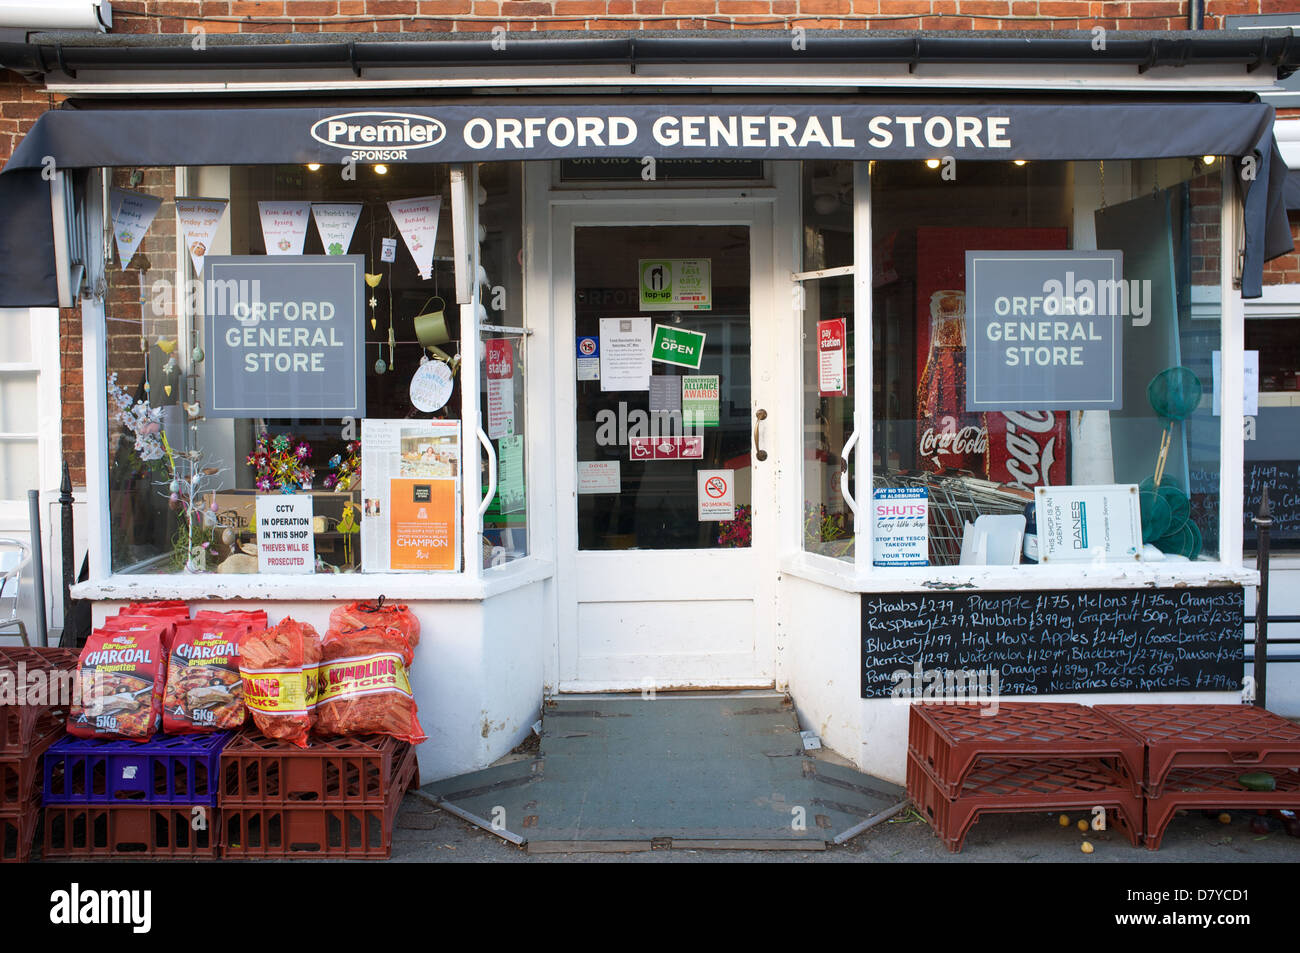 Orford General Store, Orford, Suffolk, UK. Stock Photo